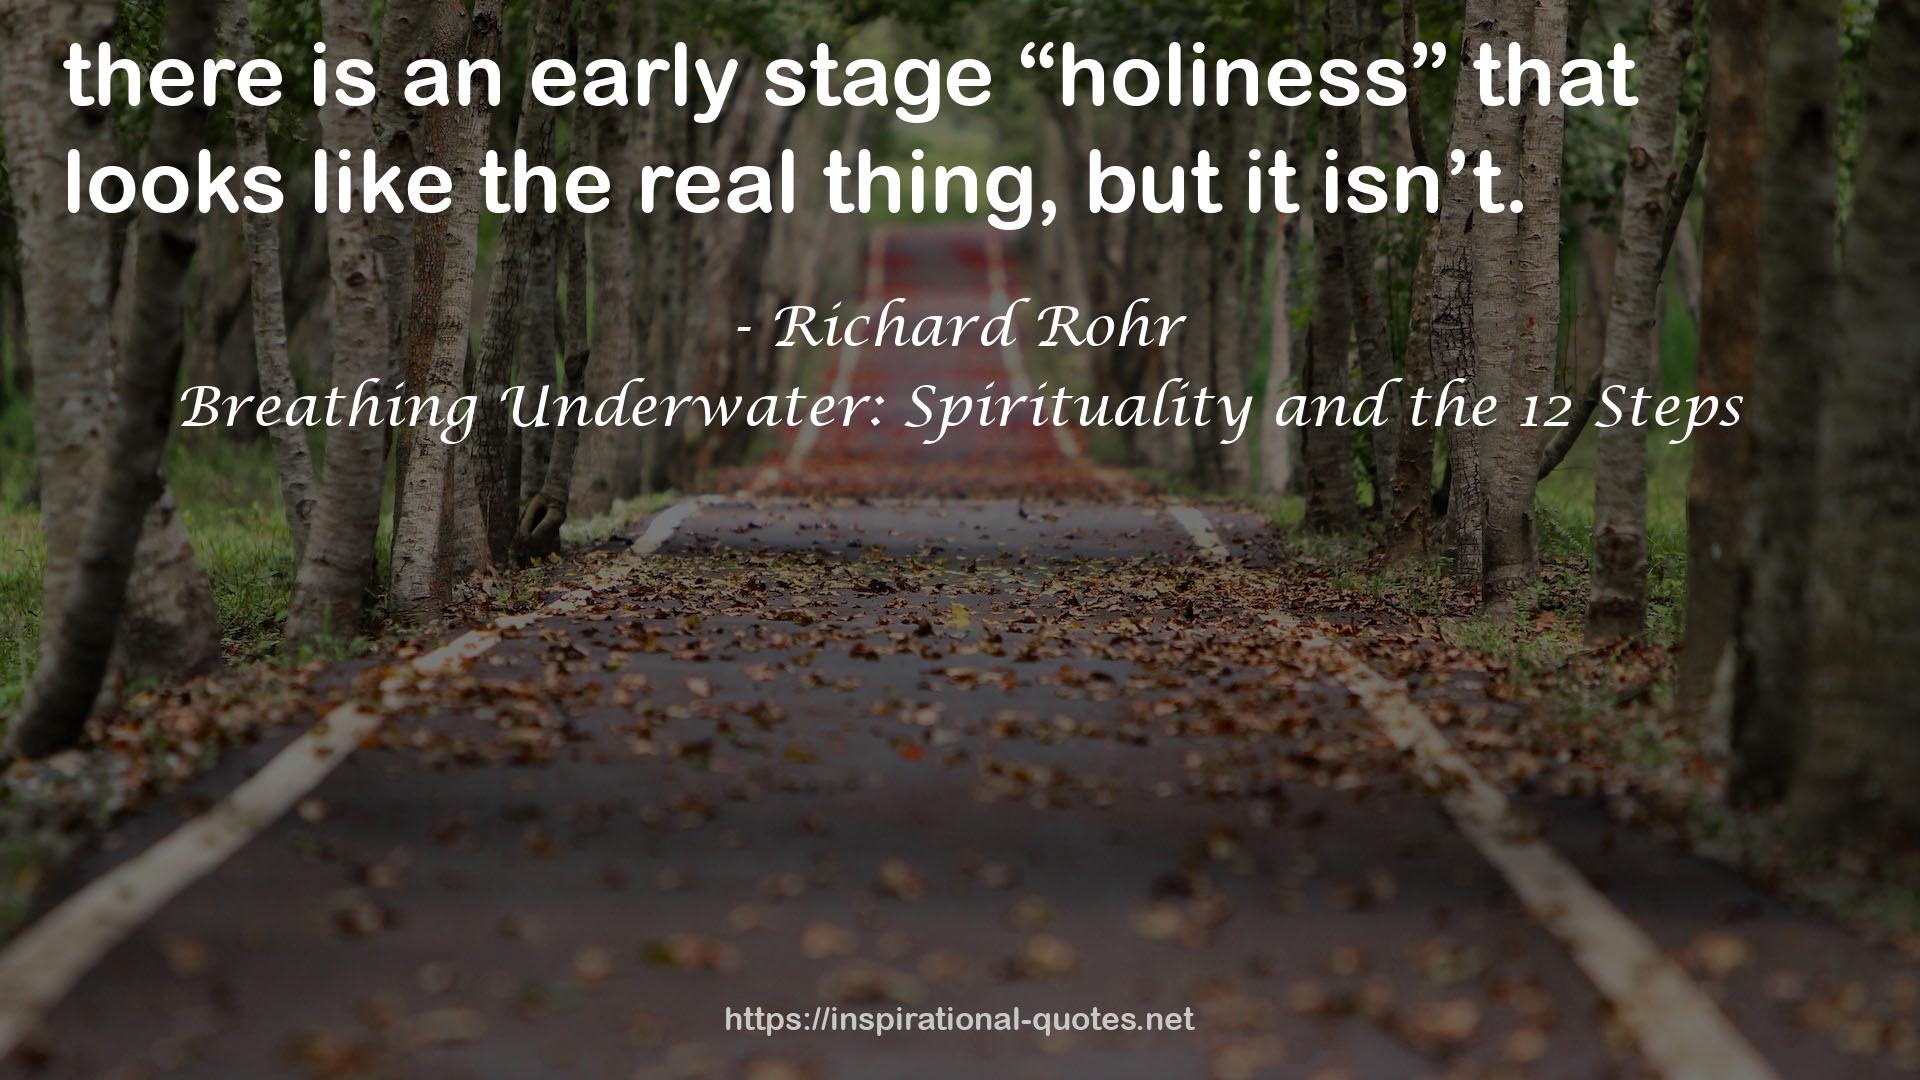 Breathing Underwater: Spirituality and the 12 Steps QUOTES